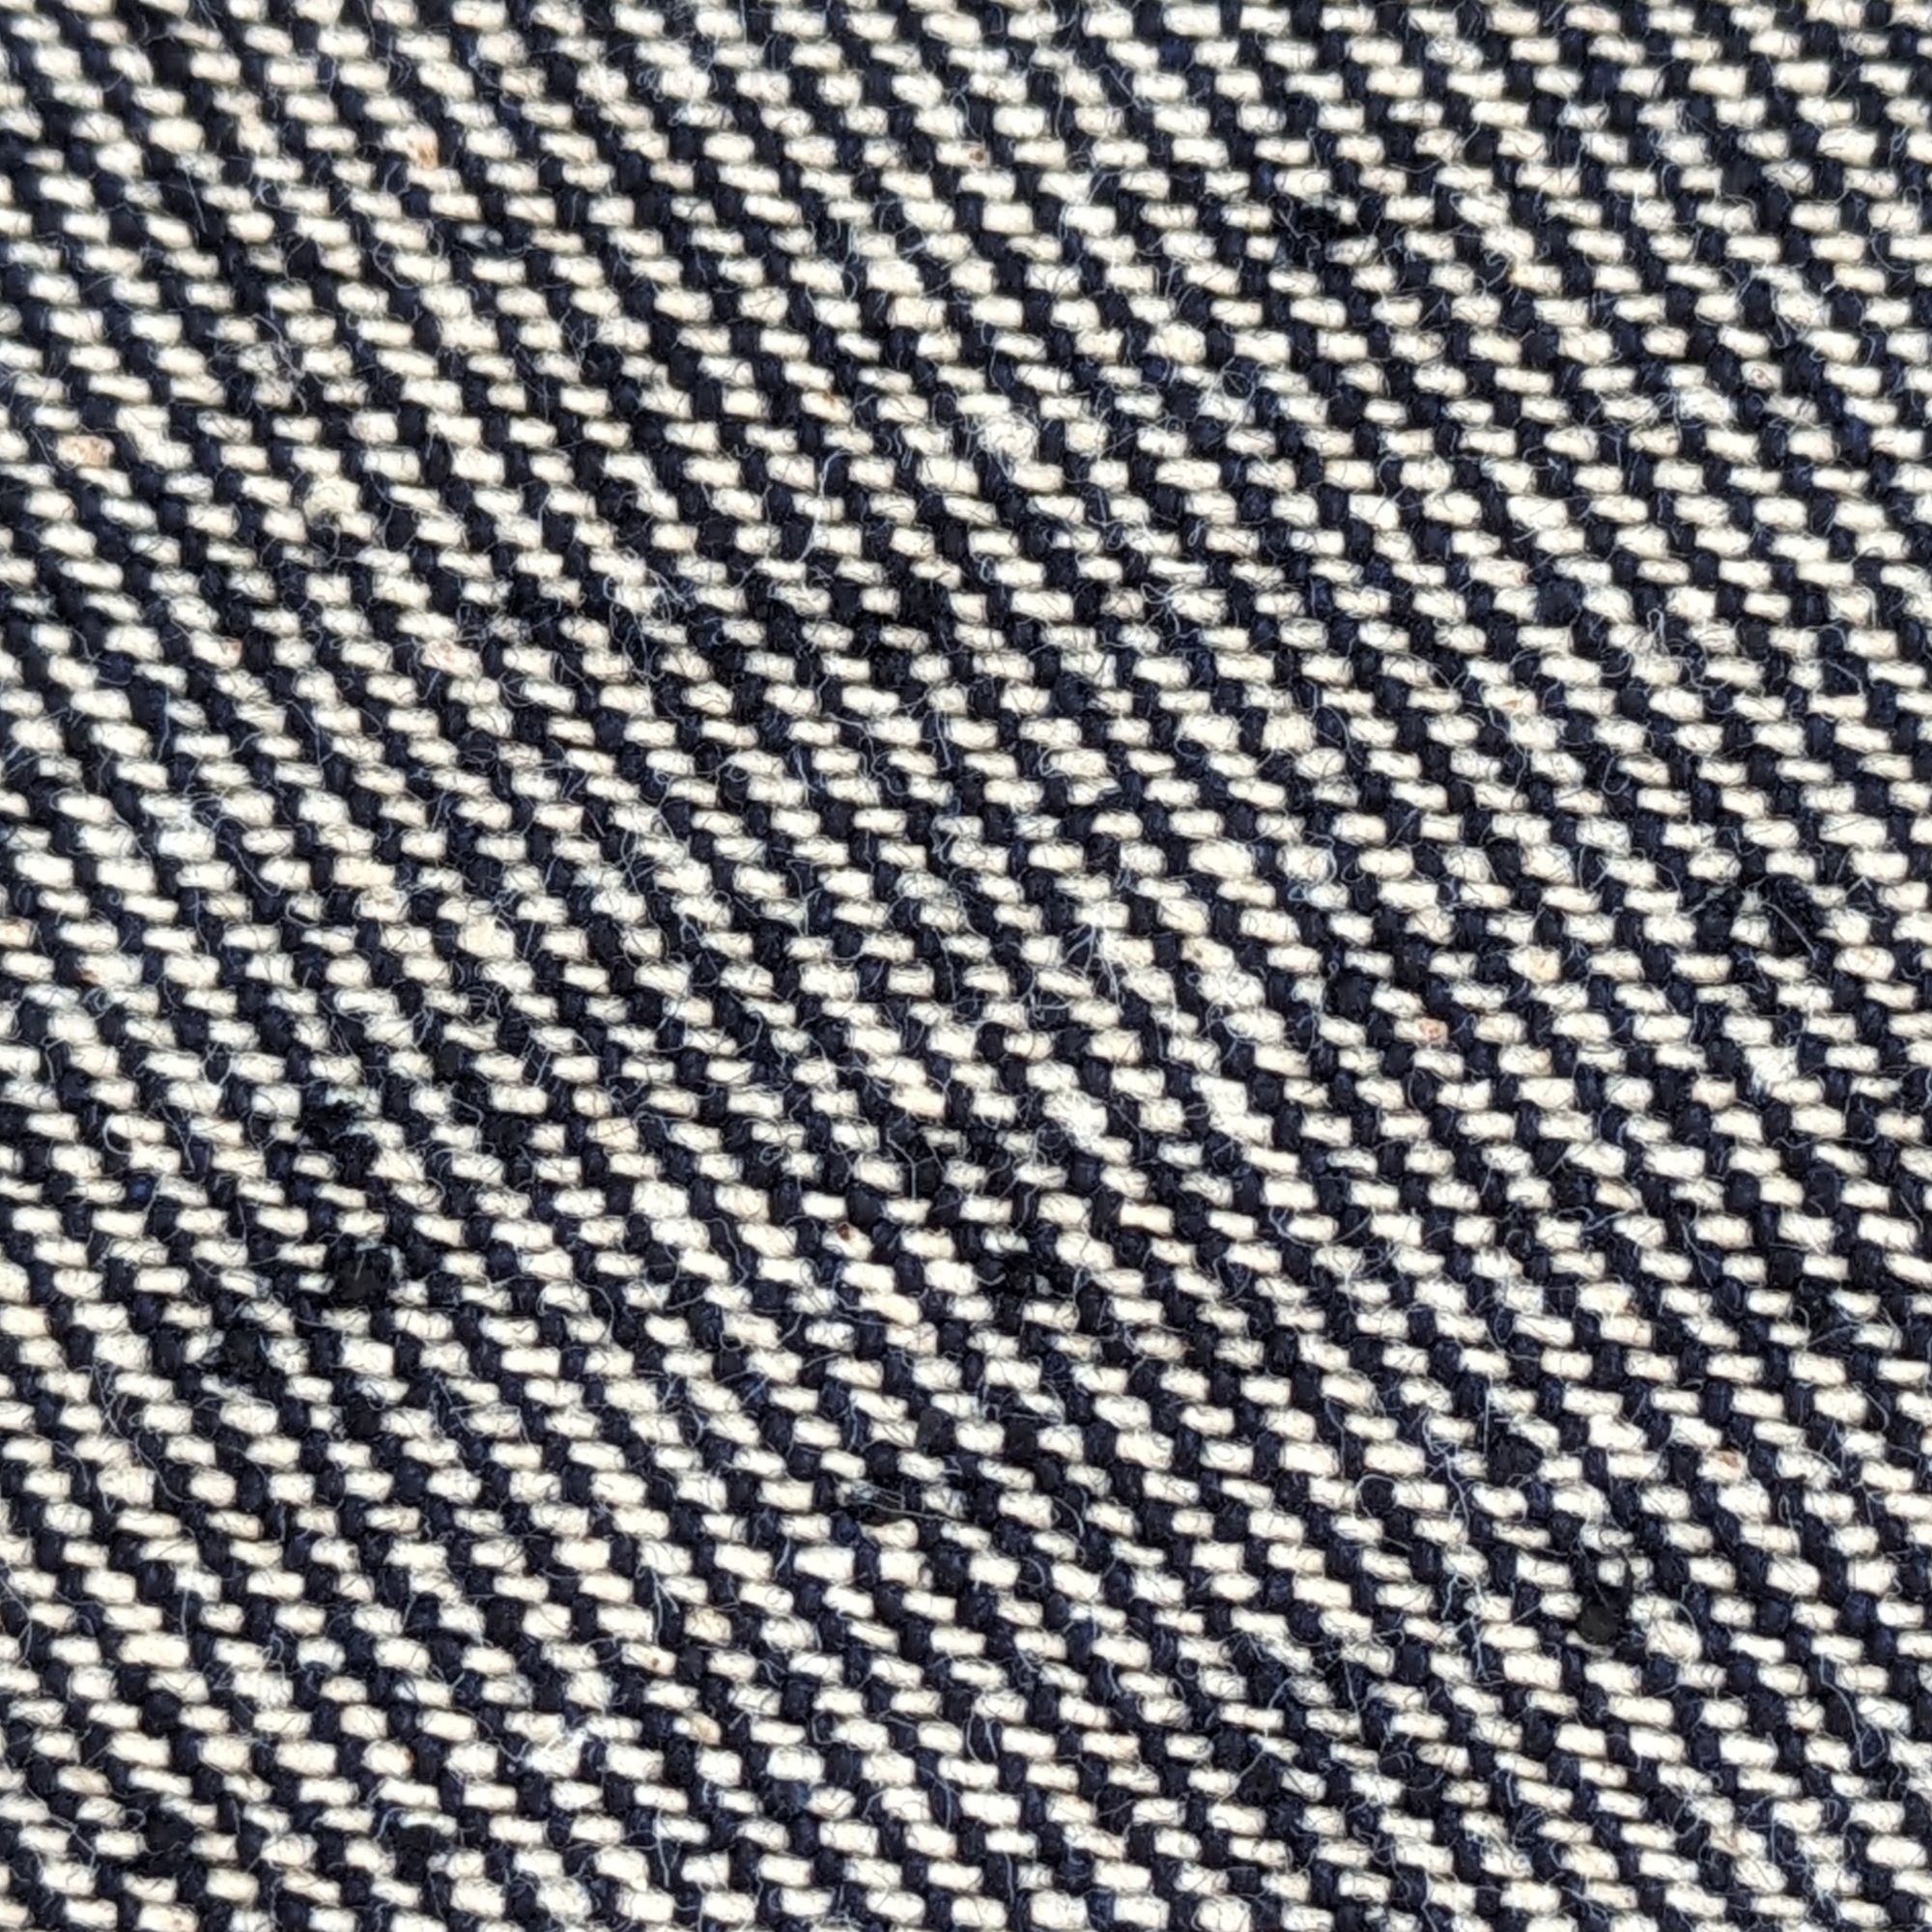 Denim Fabric Reverse Side Showing The Twill Weave